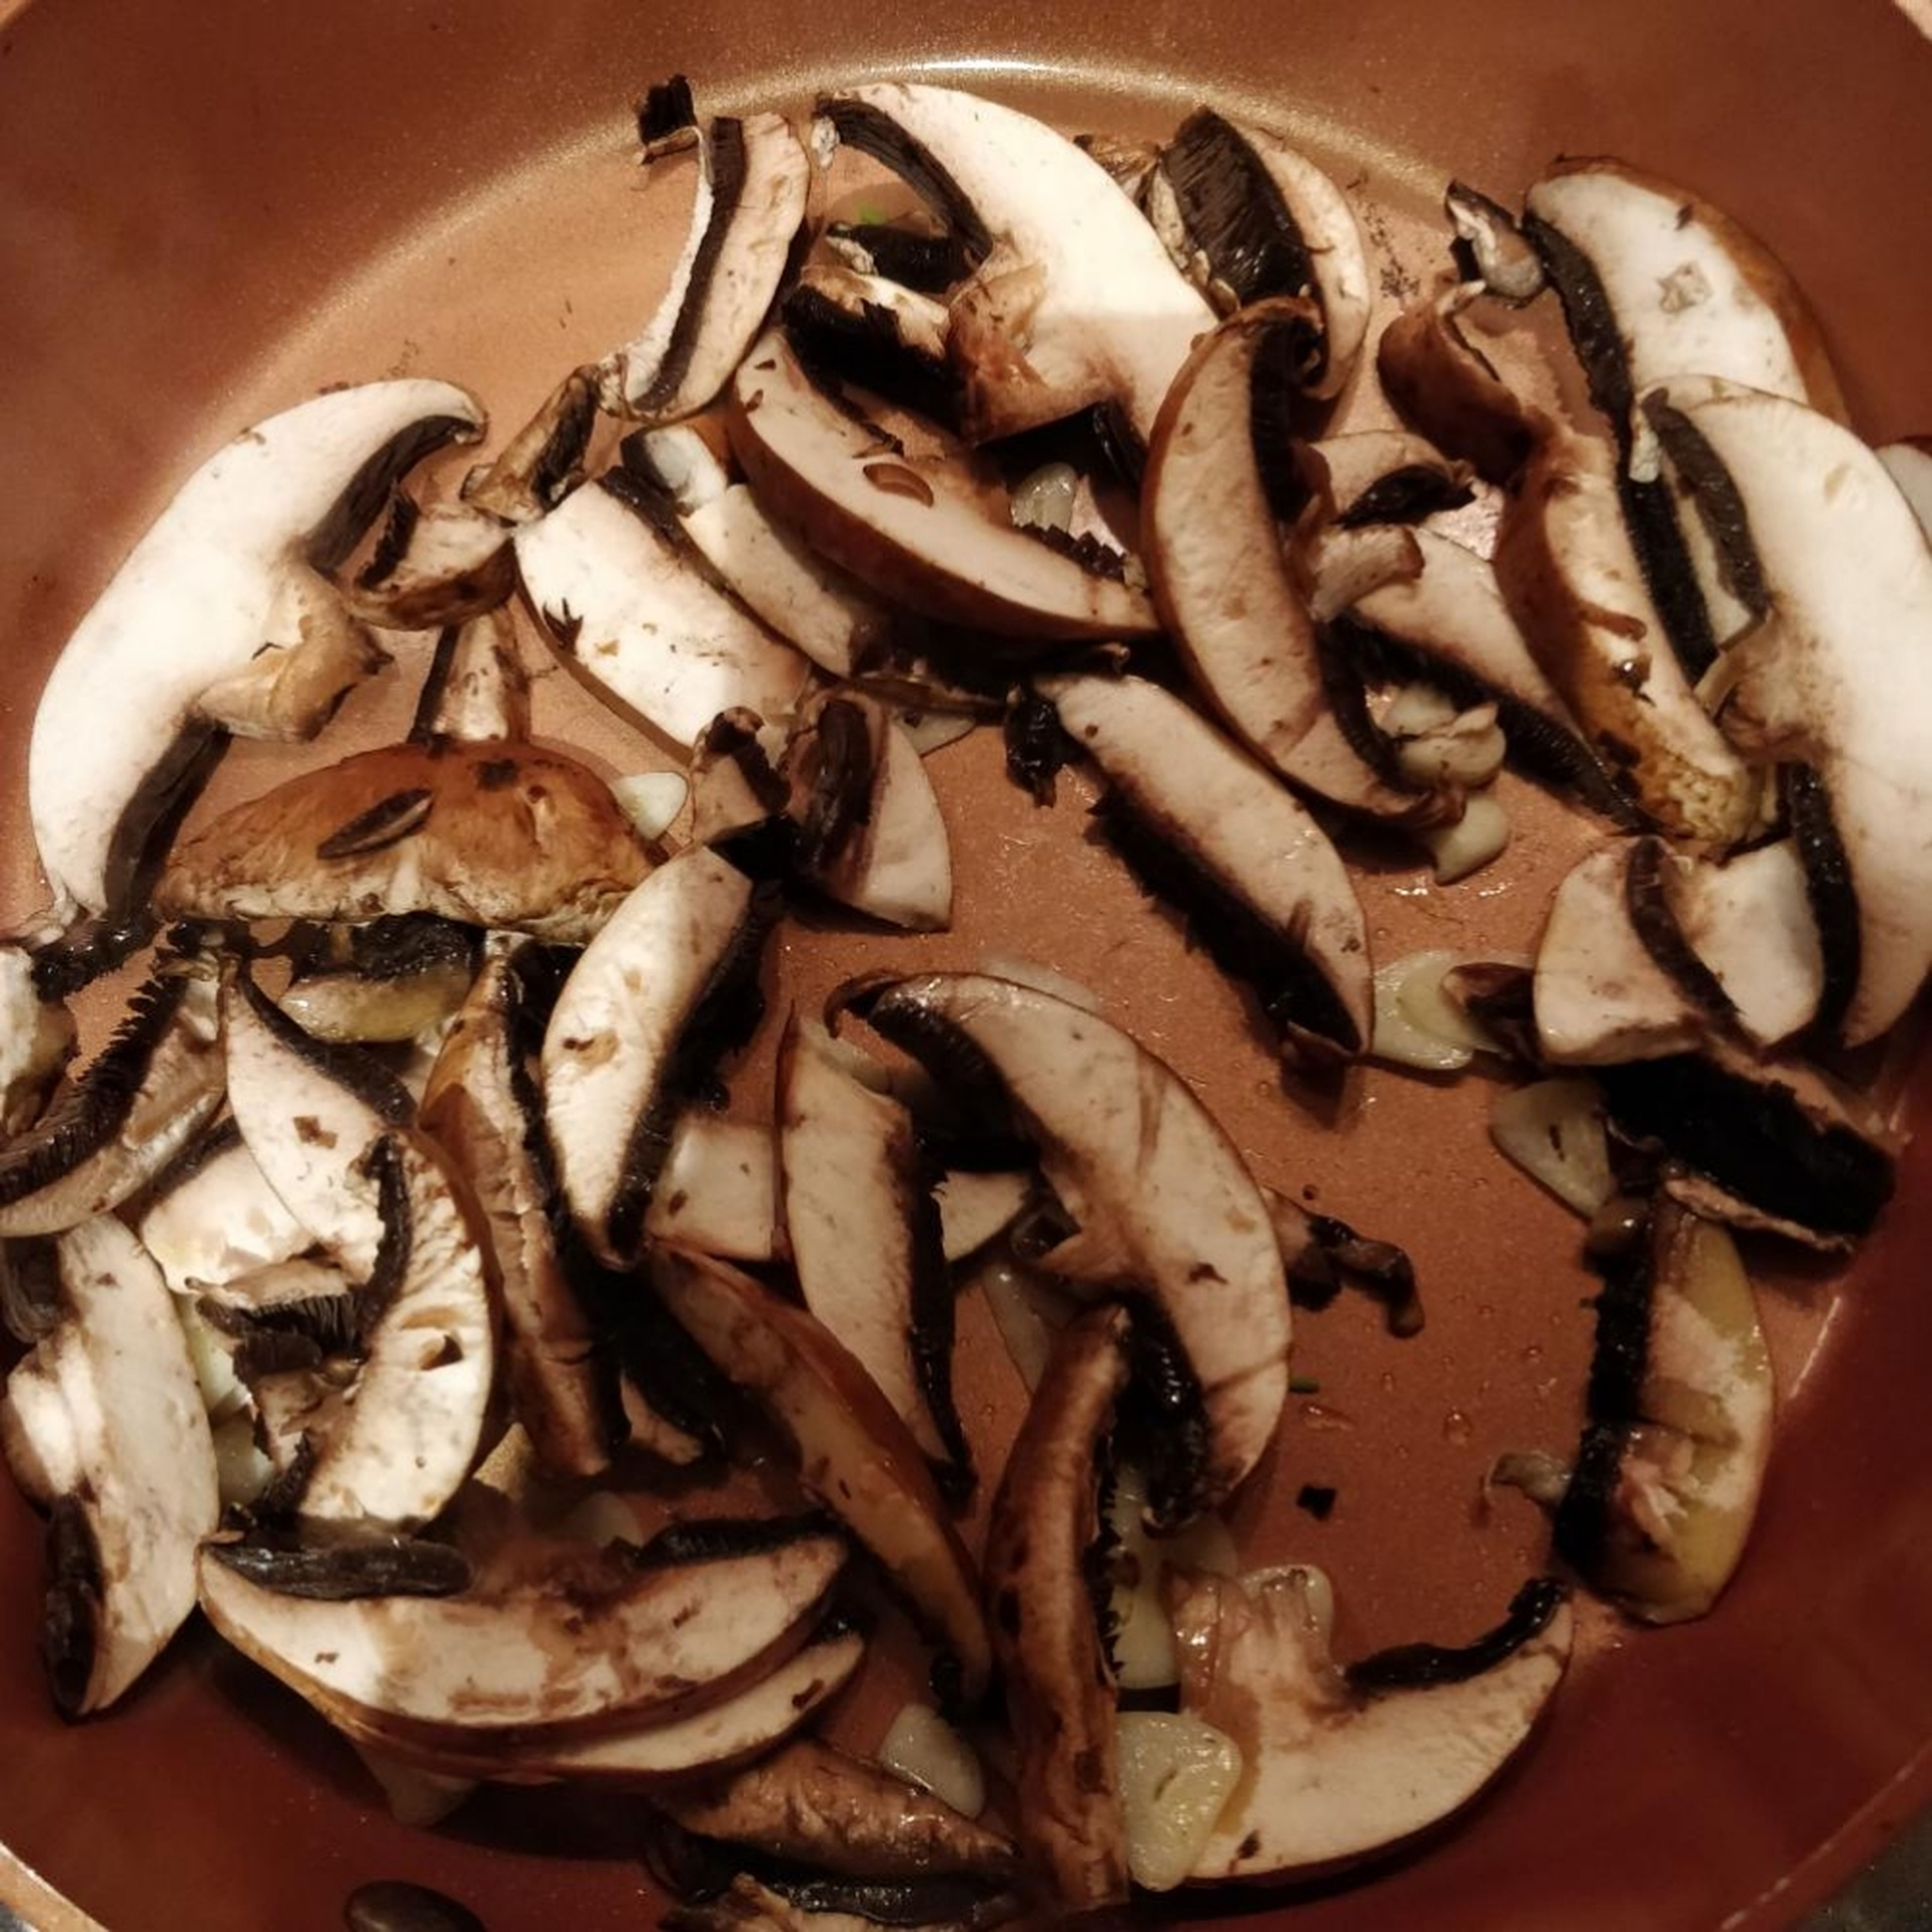 Heat a frying pan and add a knob of butter. when just melted, add the garlic and mushrooms and fry until soft and browned (approximately 5 minutes).